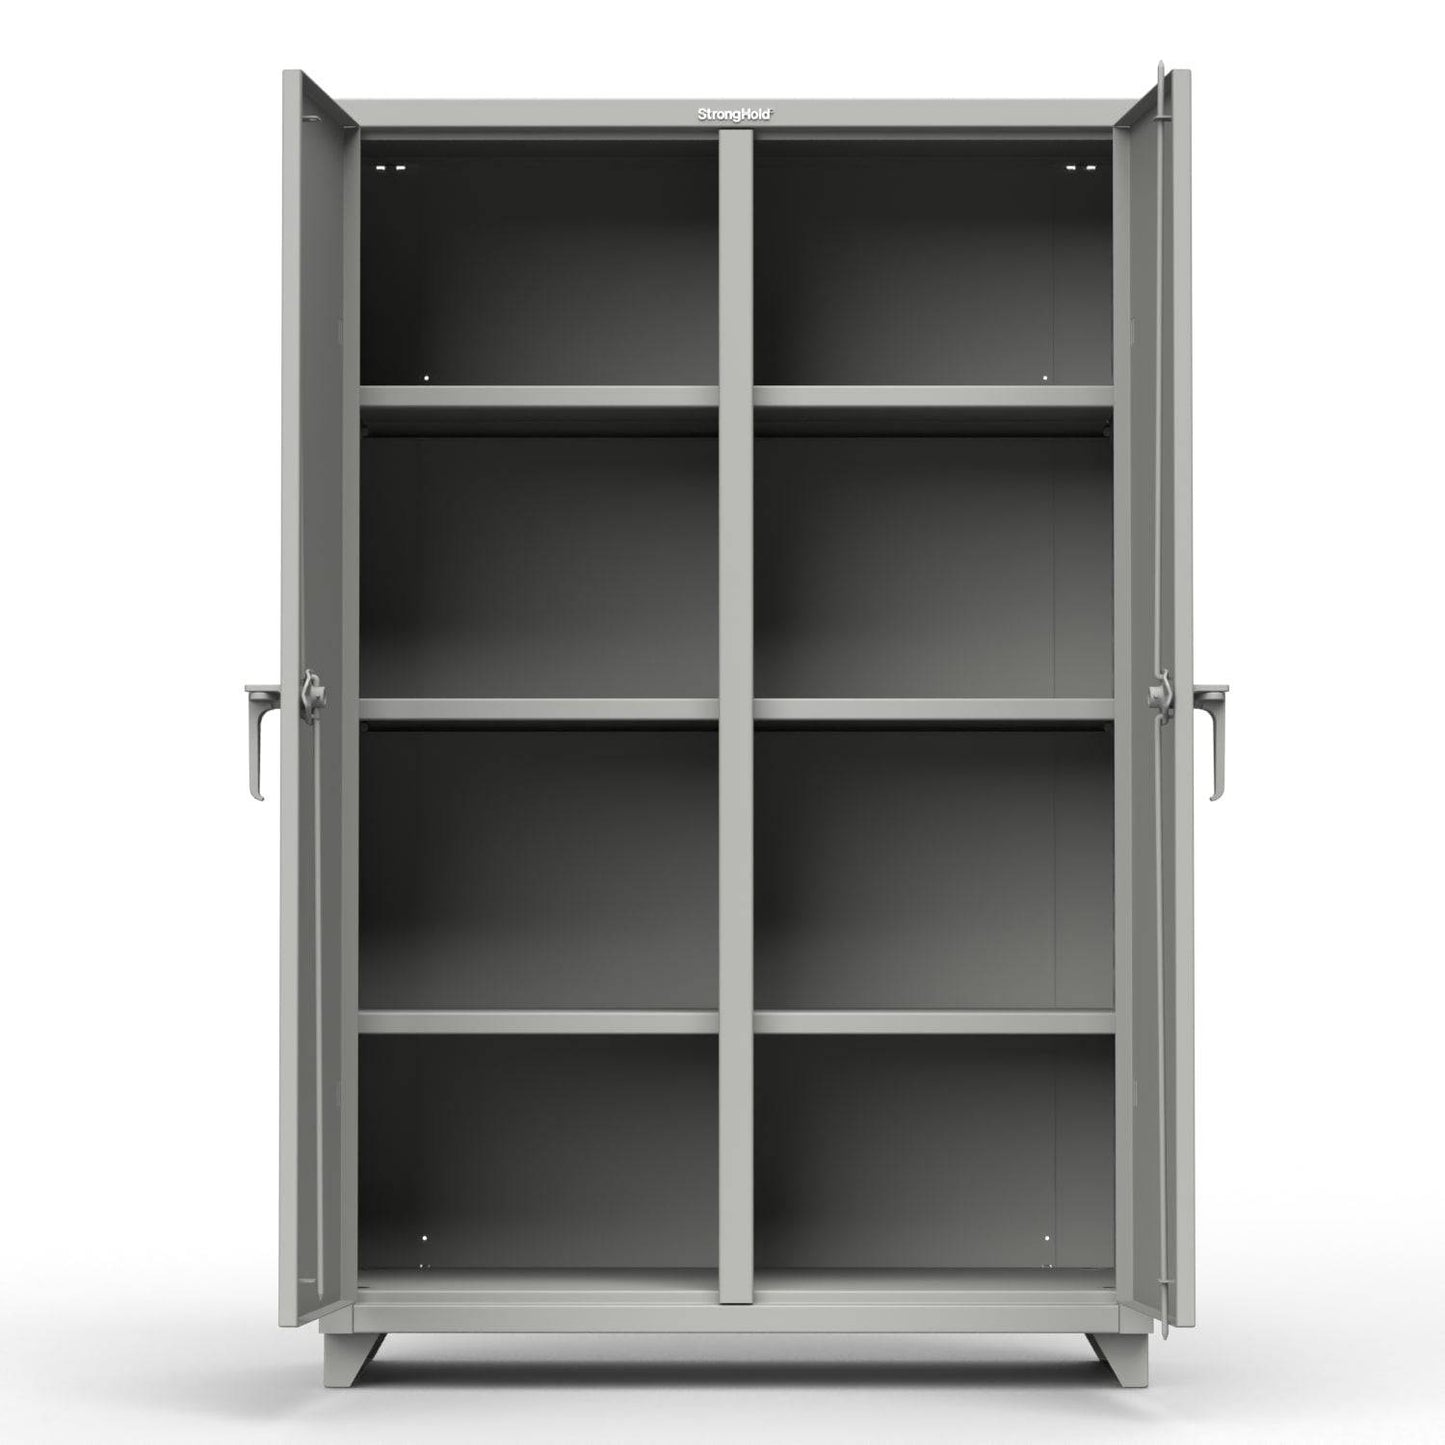 Extra Heavy Duty 14 GA Double Shift Cabinet with 6 Shelves - 48 In. W x 24 In. D x 75 In. H - Strong Hold